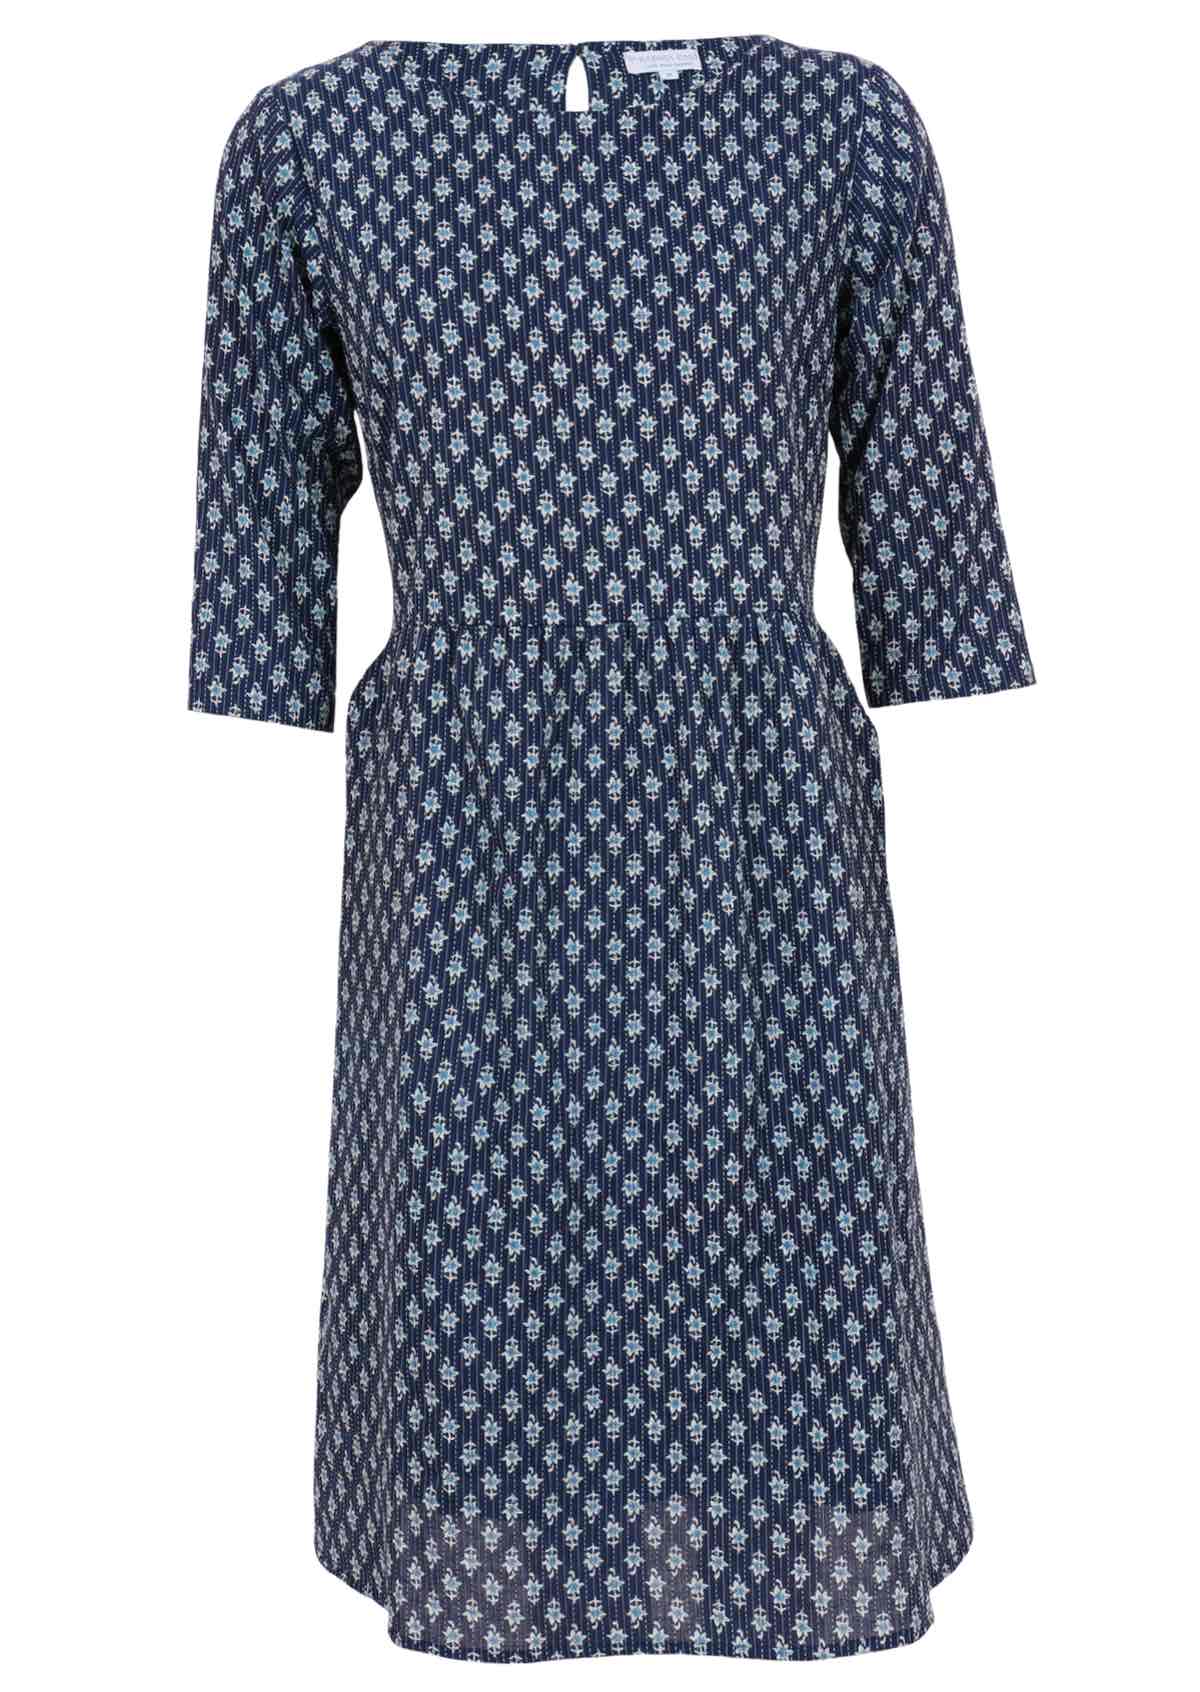 3/4 sleeved cotton lined dress in sweet flower print